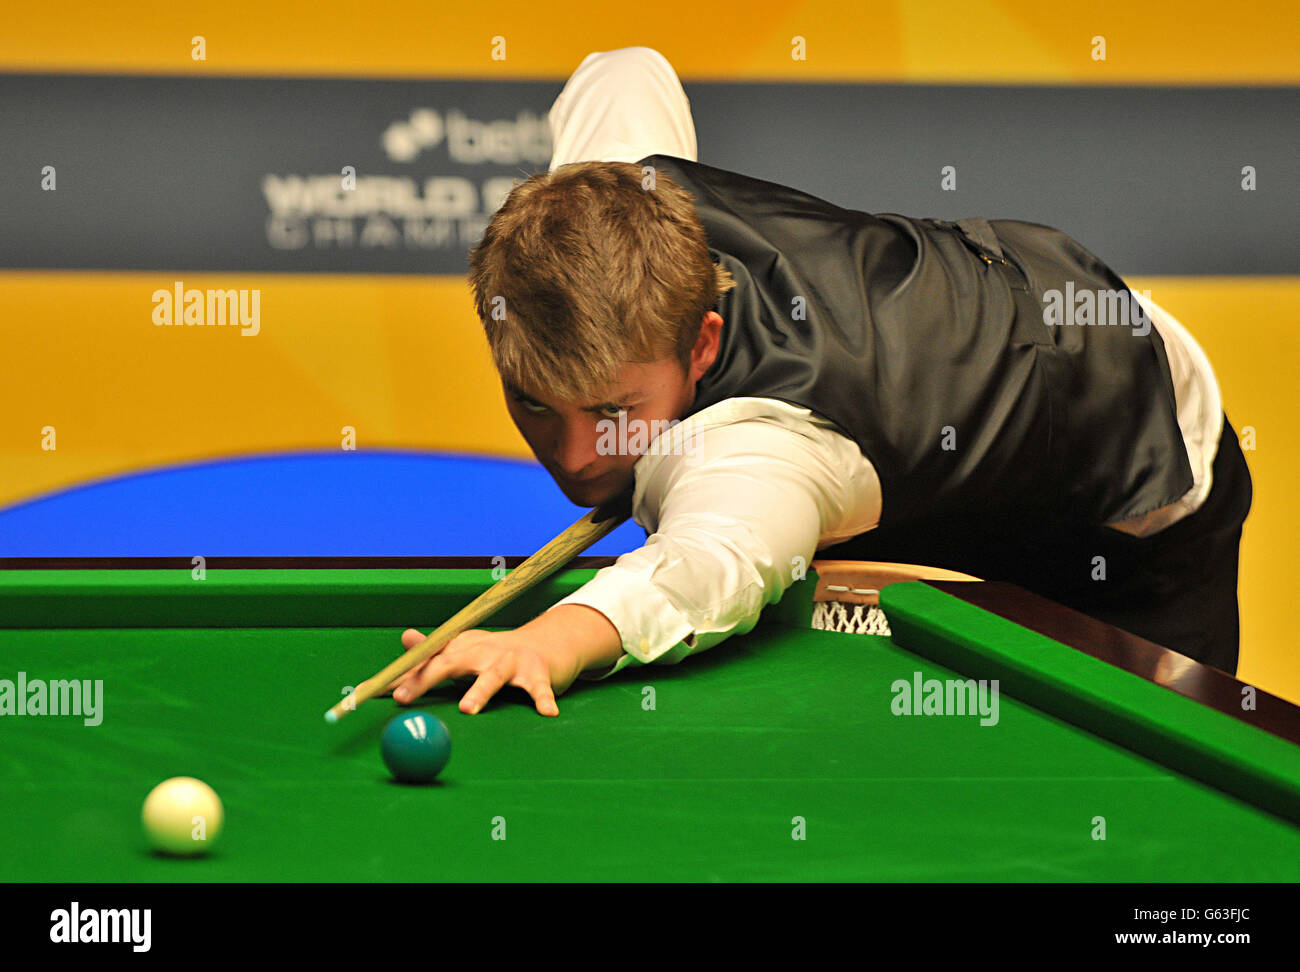 Michael White in action during his quarter final match against Ricky Walden during the Betfair World Championships at the Crucible, Sheffield. Stock Photo